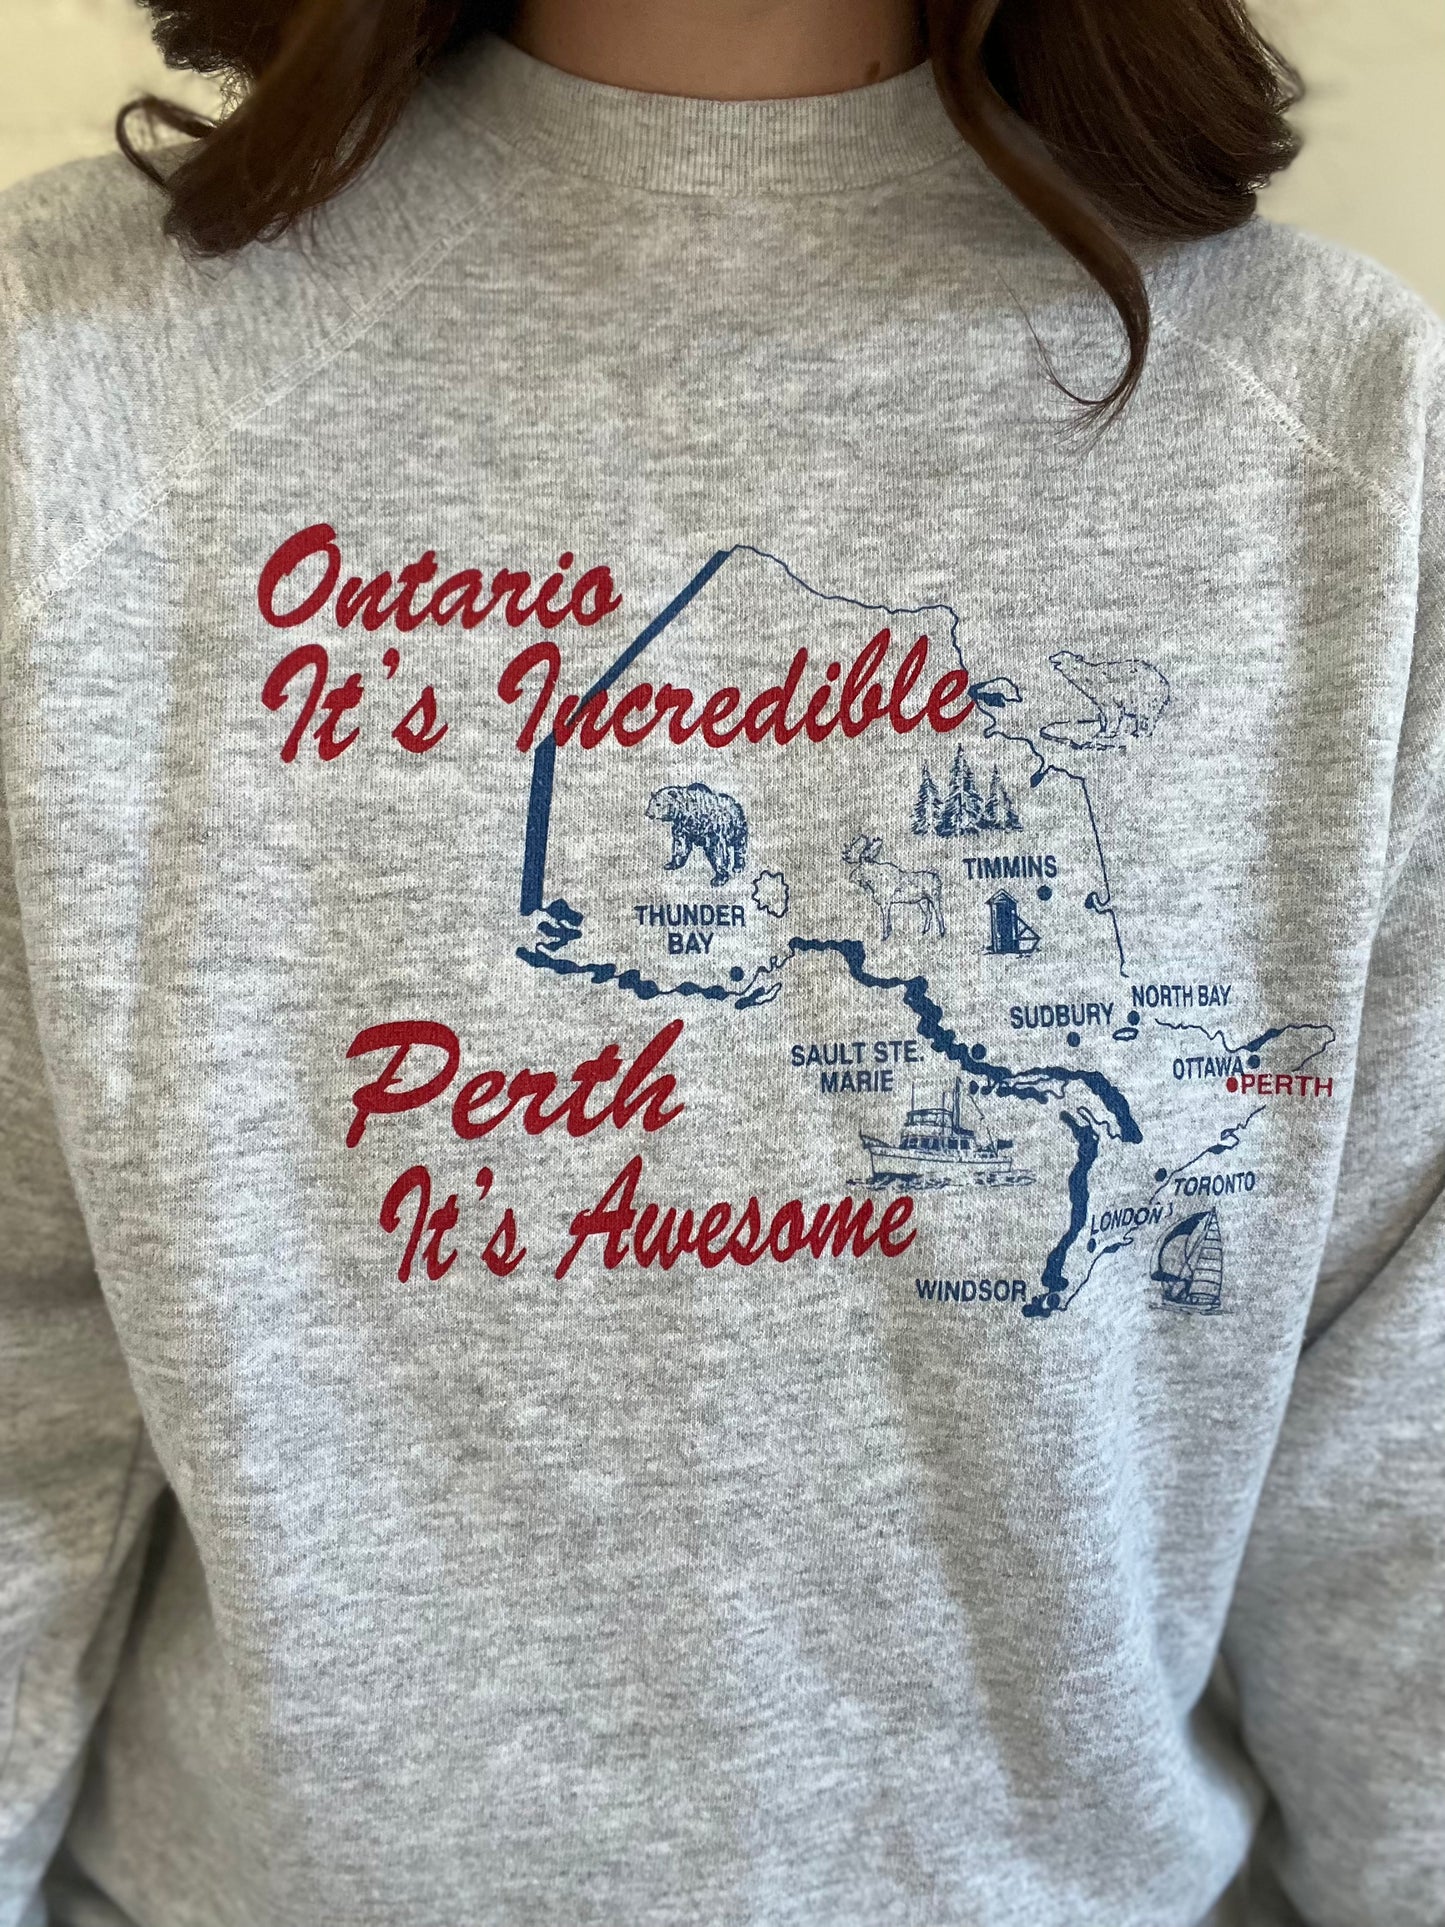 Perth It's Awesome Ontario Sweater - XL